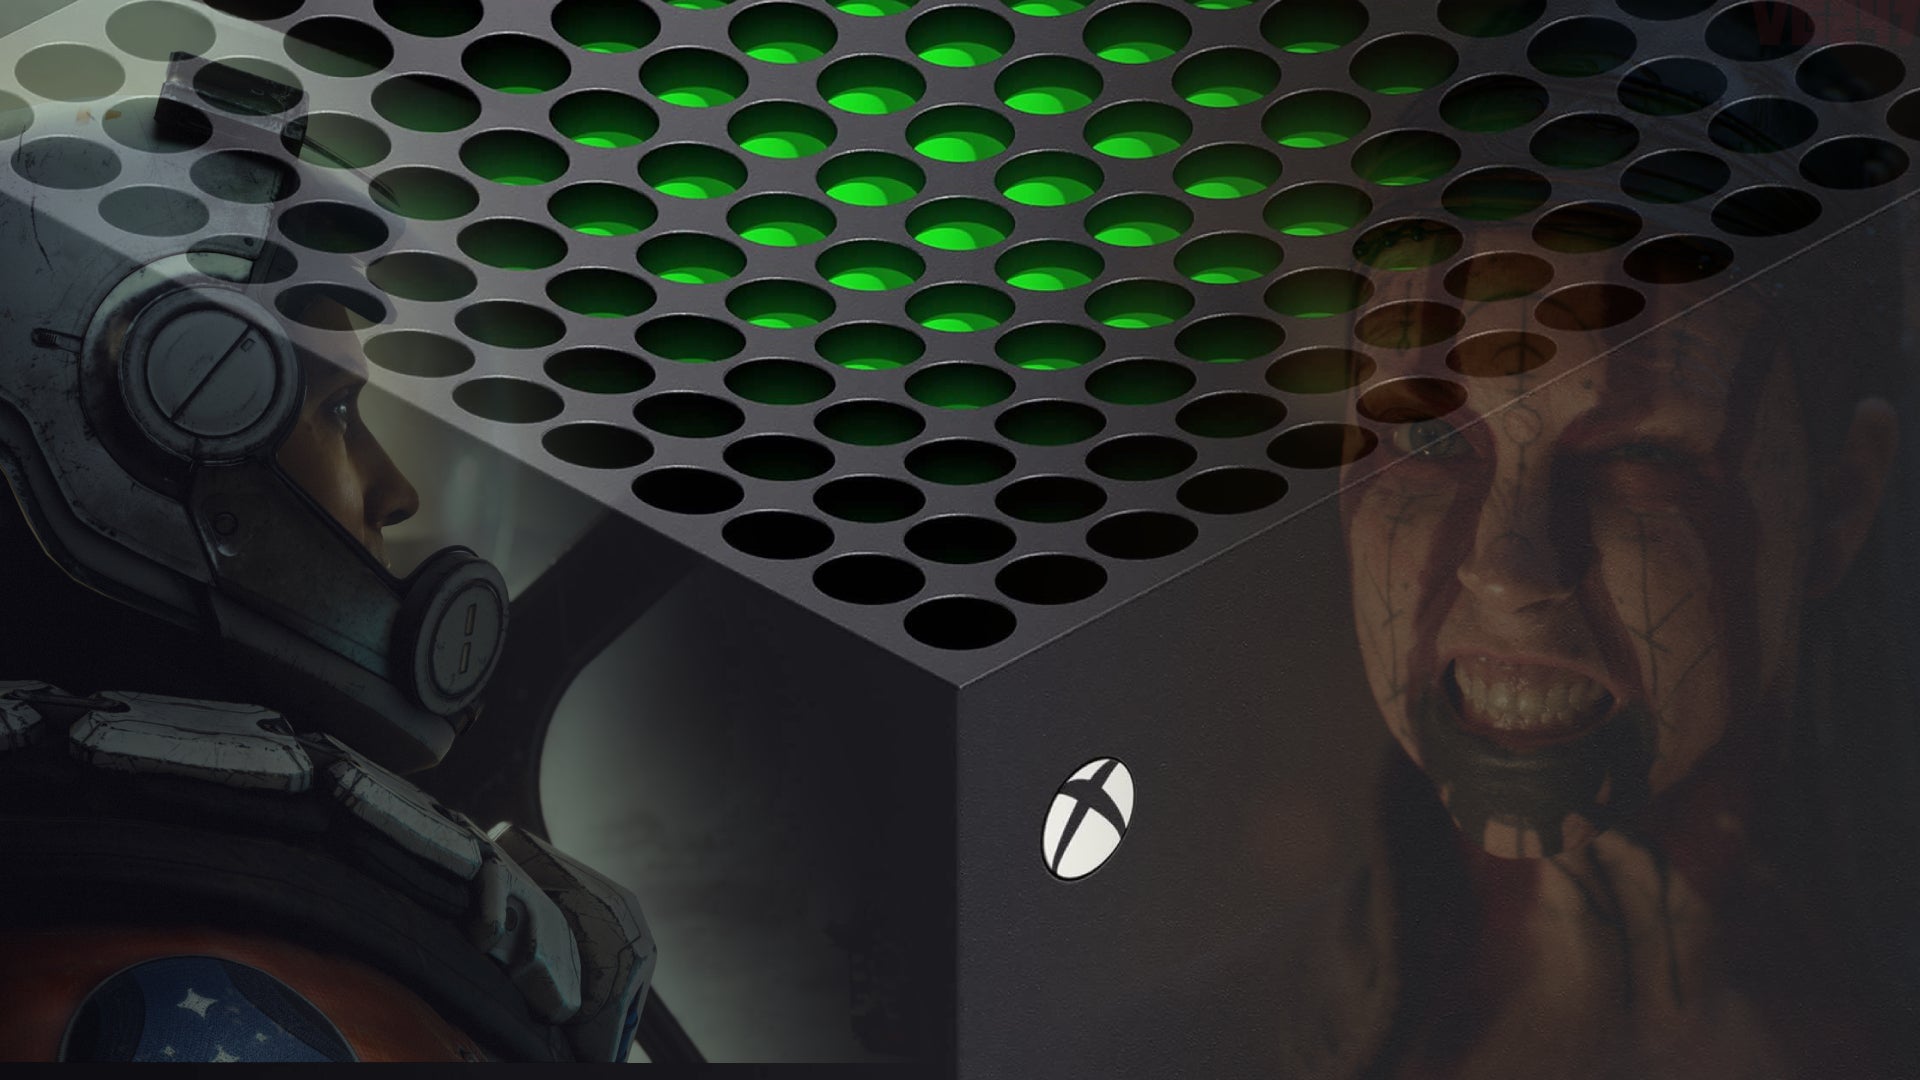 Image for 2 years in, the Xbox Series X/S still lacks even one killer exclusive